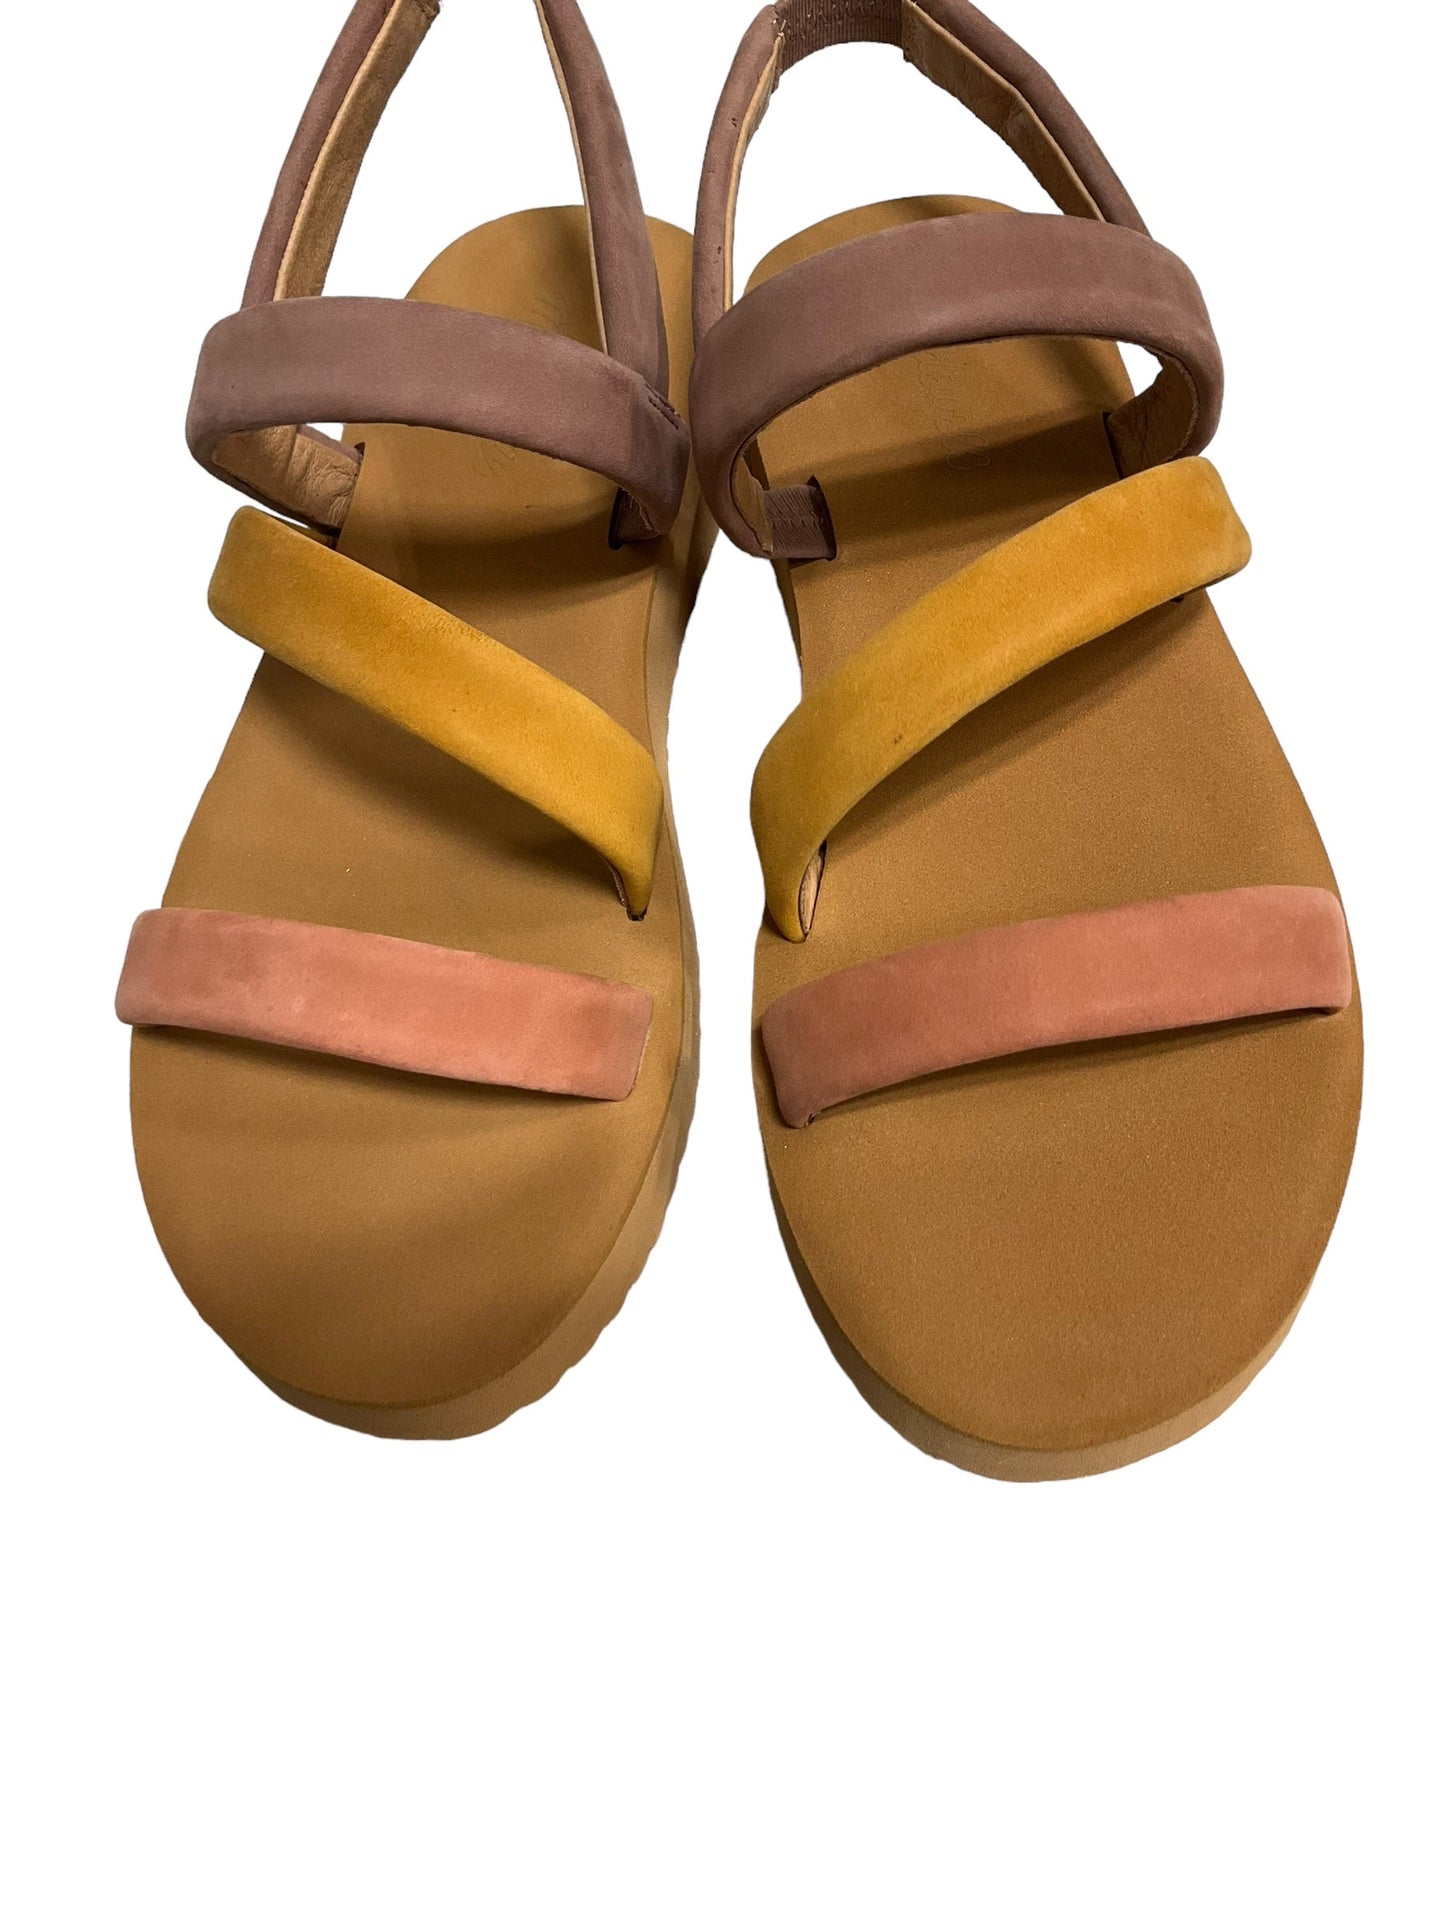 Brown & Tan Sandals Flats Madewell, Size 8.5